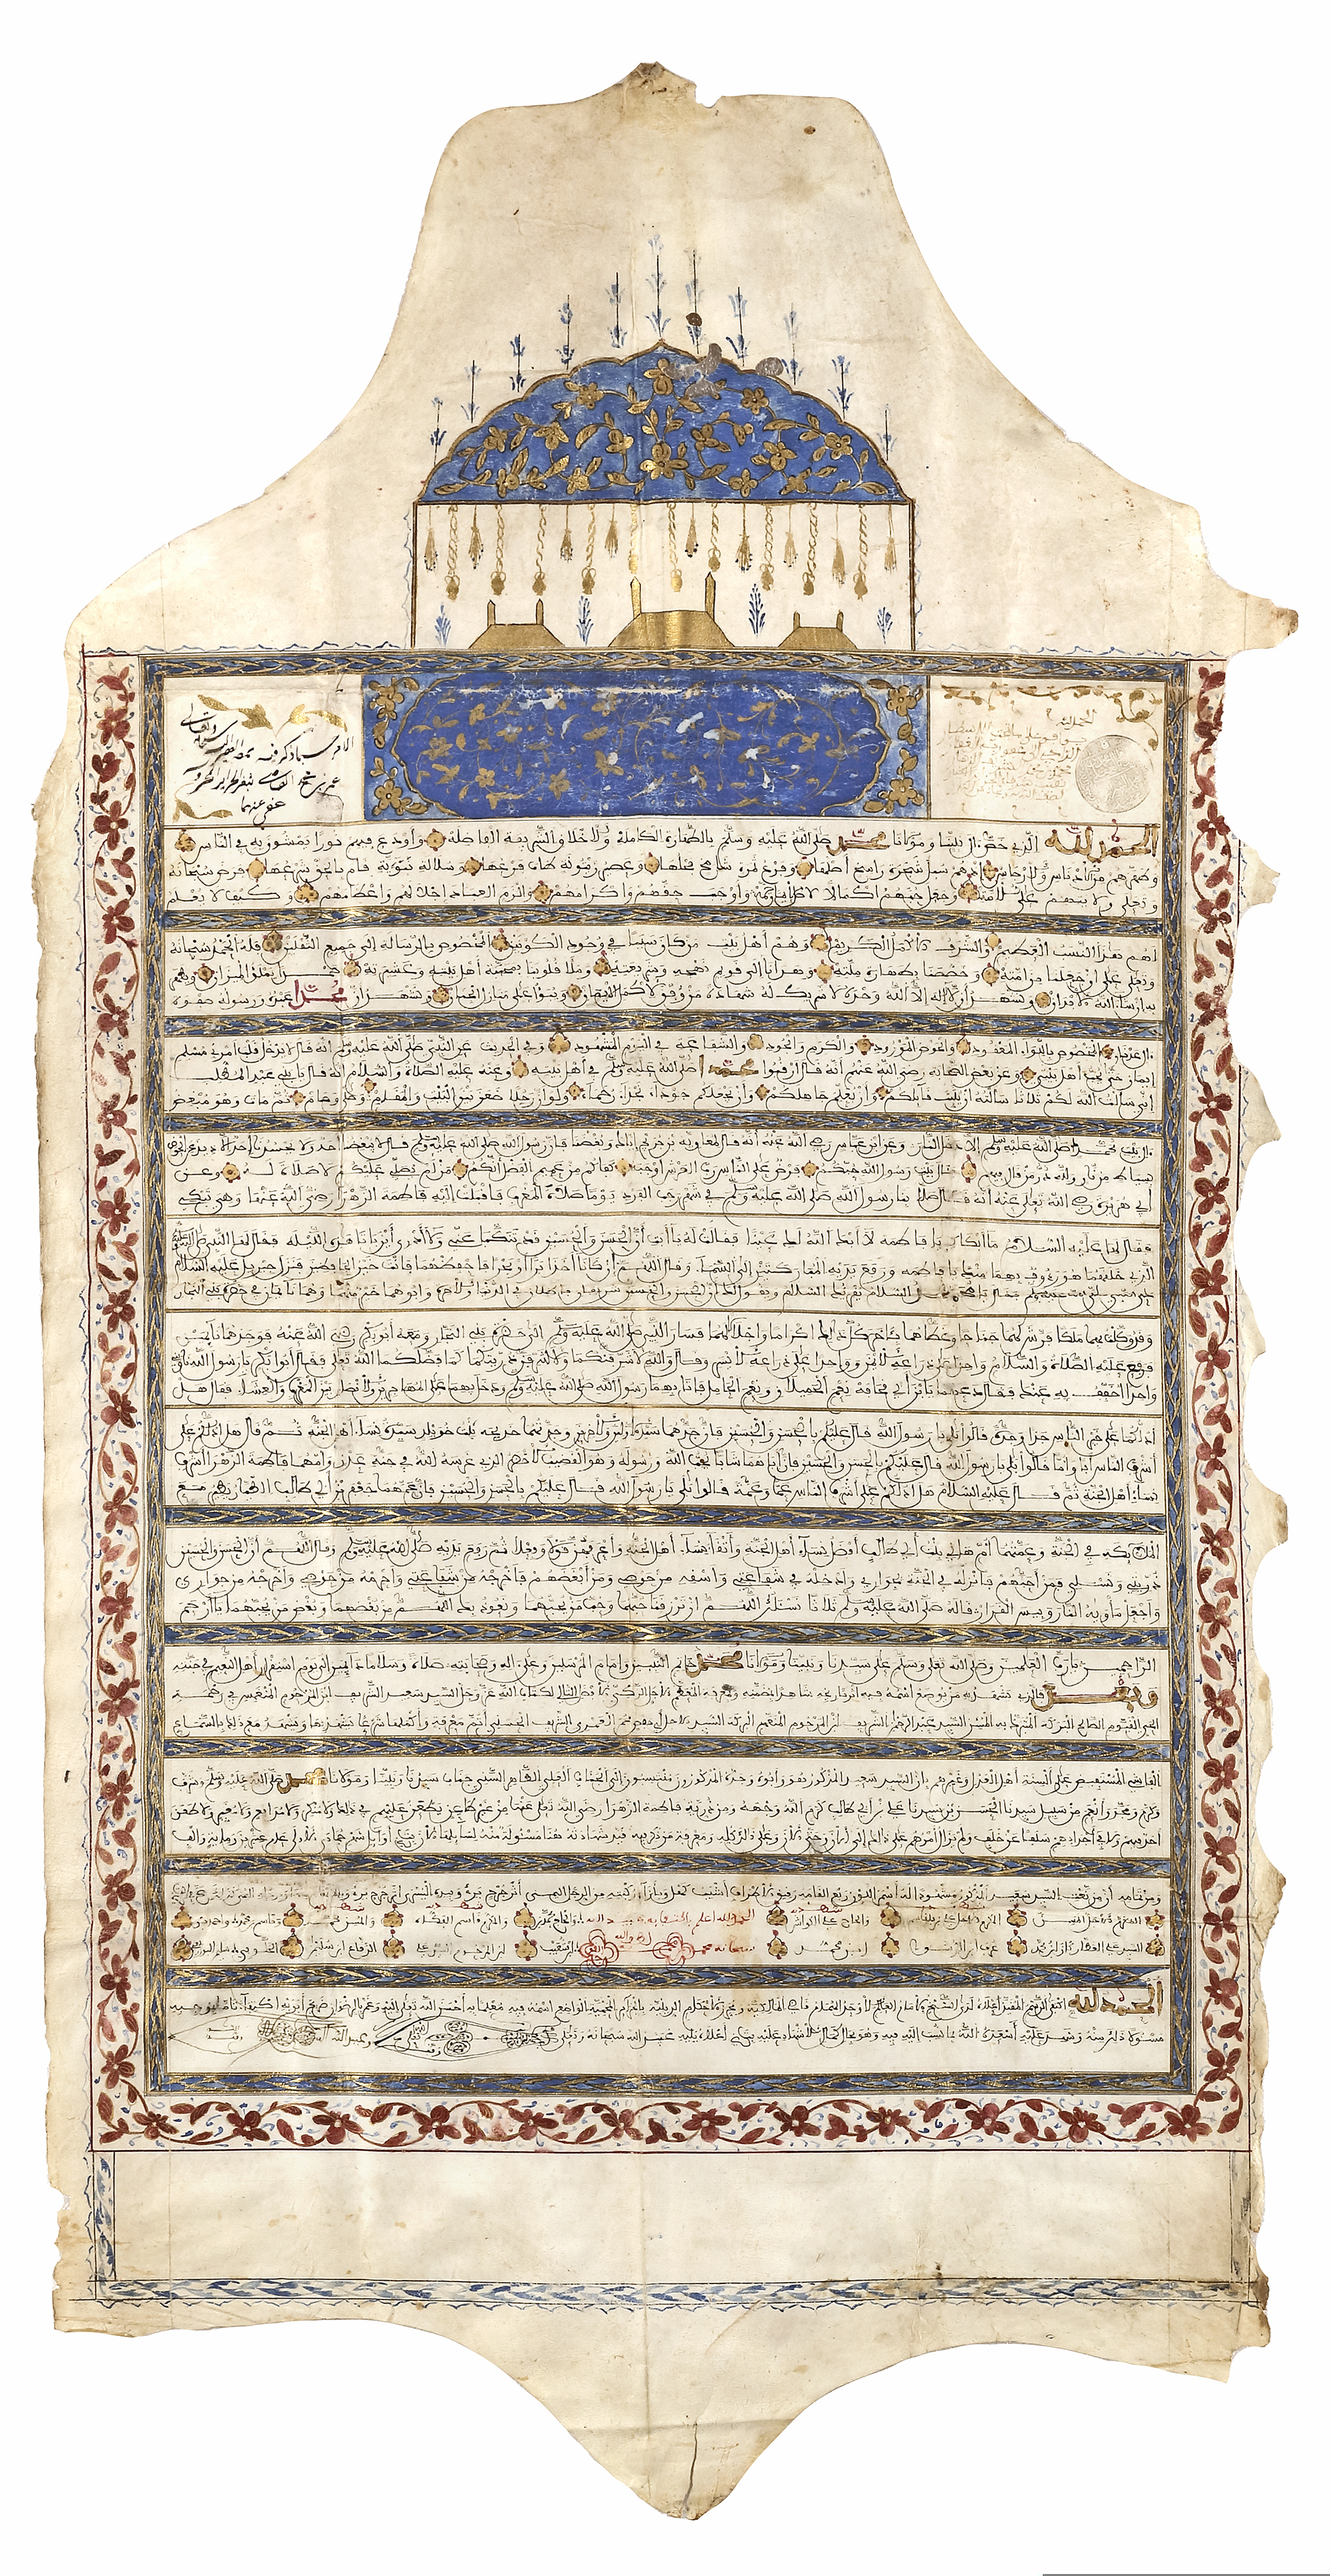 A GENEALOGY IN MAGHRIBI SCRIPT, NORTH AFRICA, MOROCCO, DATED 1120 AH/1708 AD - Image 2 of 4